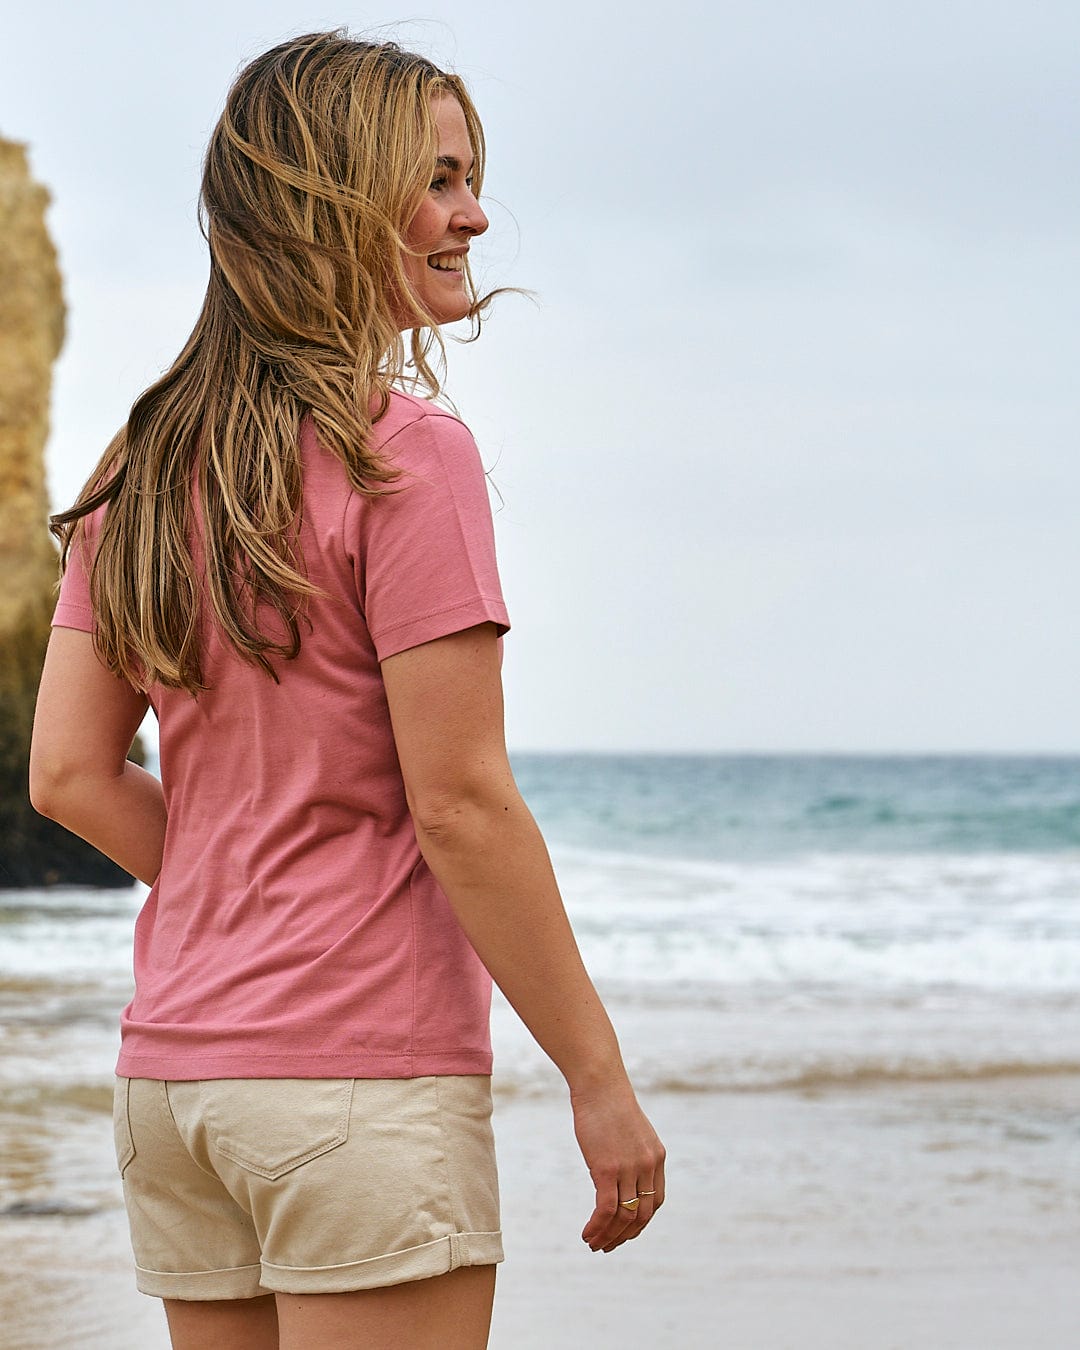 A woman in a pink shirt standing on a beach wearing the Love Your Ocean - Womens Short Sleeve T-Shirt - Mid Pink by Saltrock.